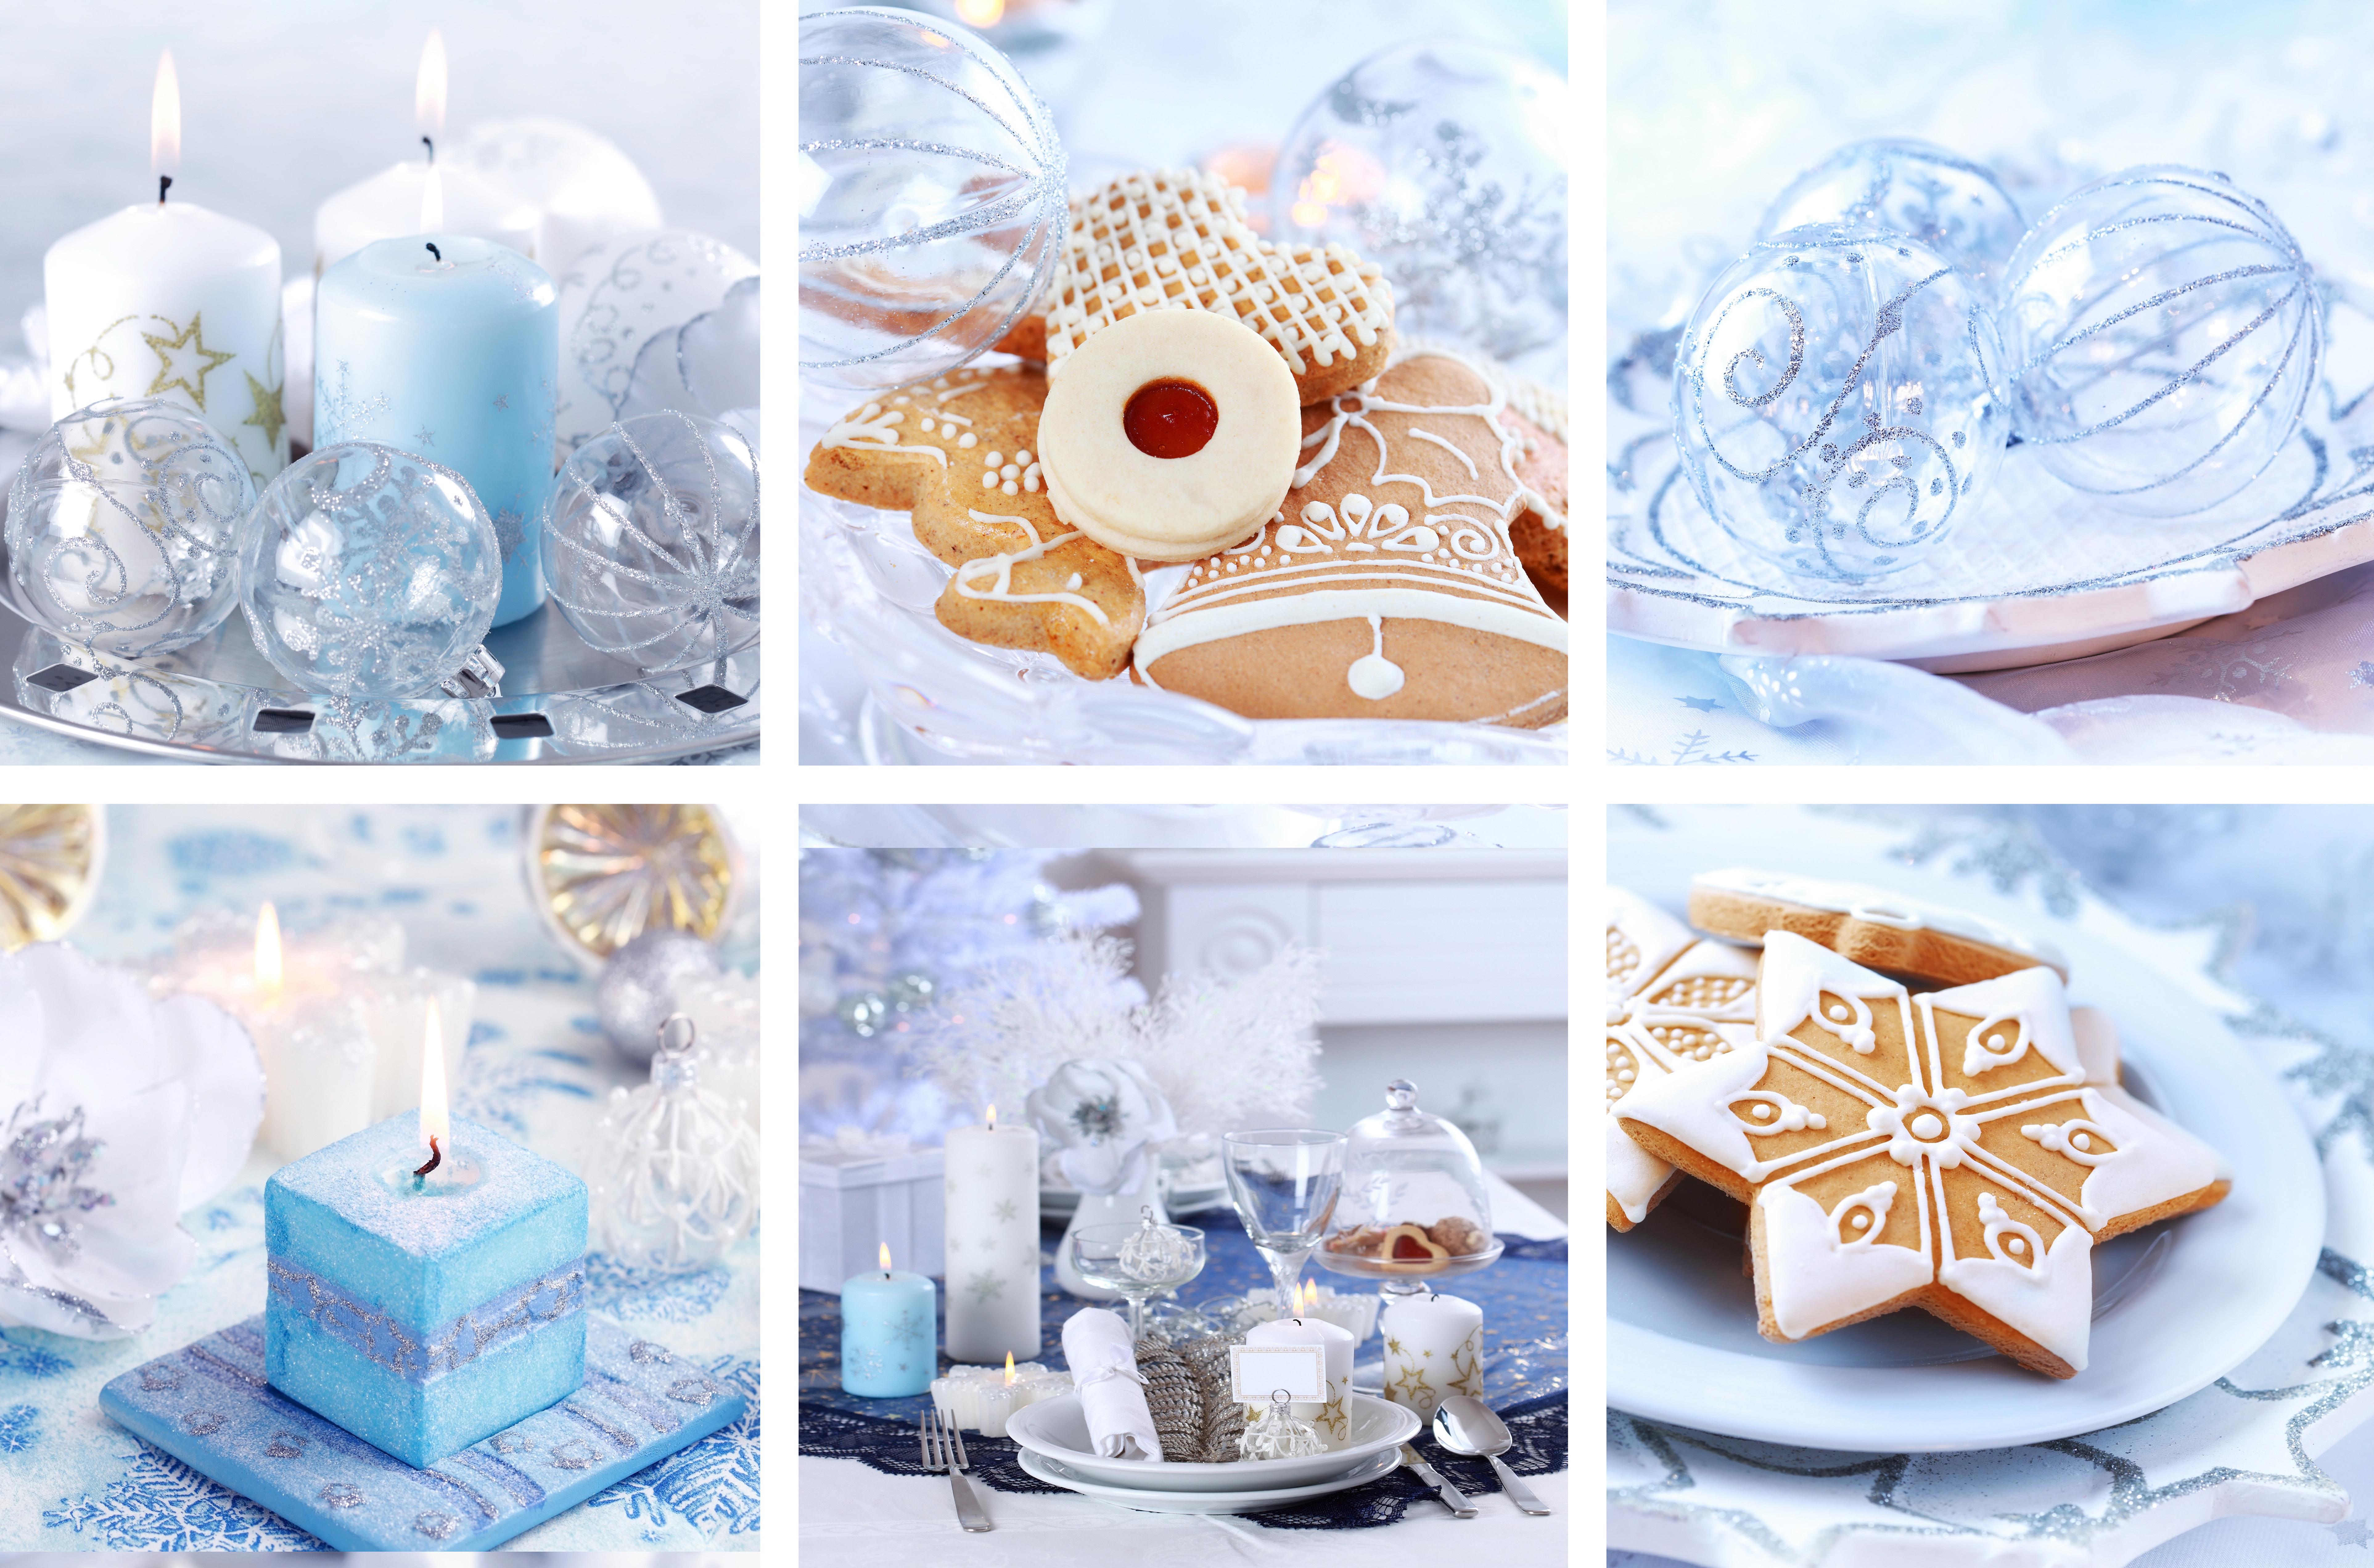 Christmas Collage 8k Ultra HD Wallpaper. Background Image